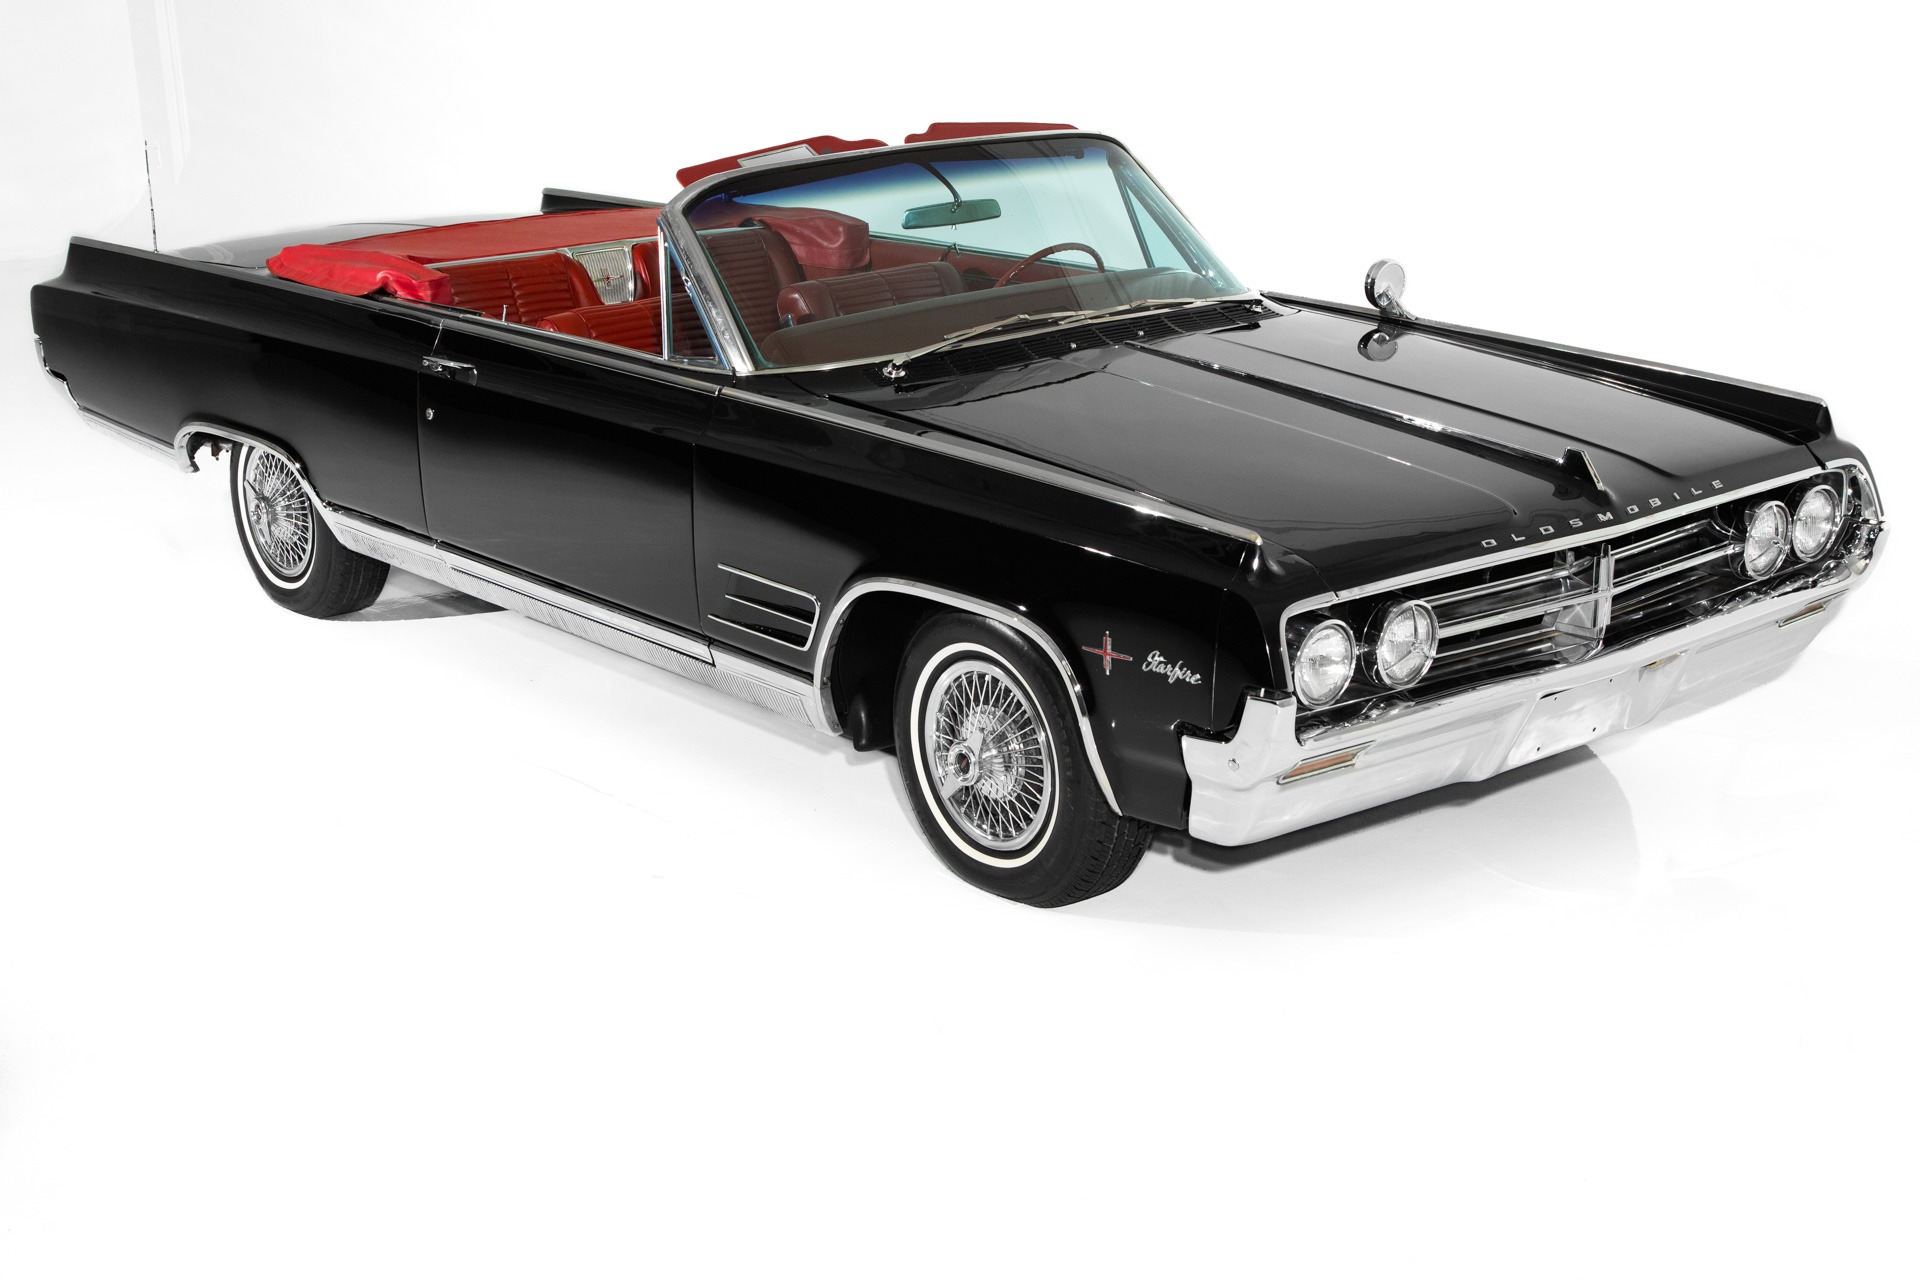 Oldsmobile Starfire Convertible Wallpapers